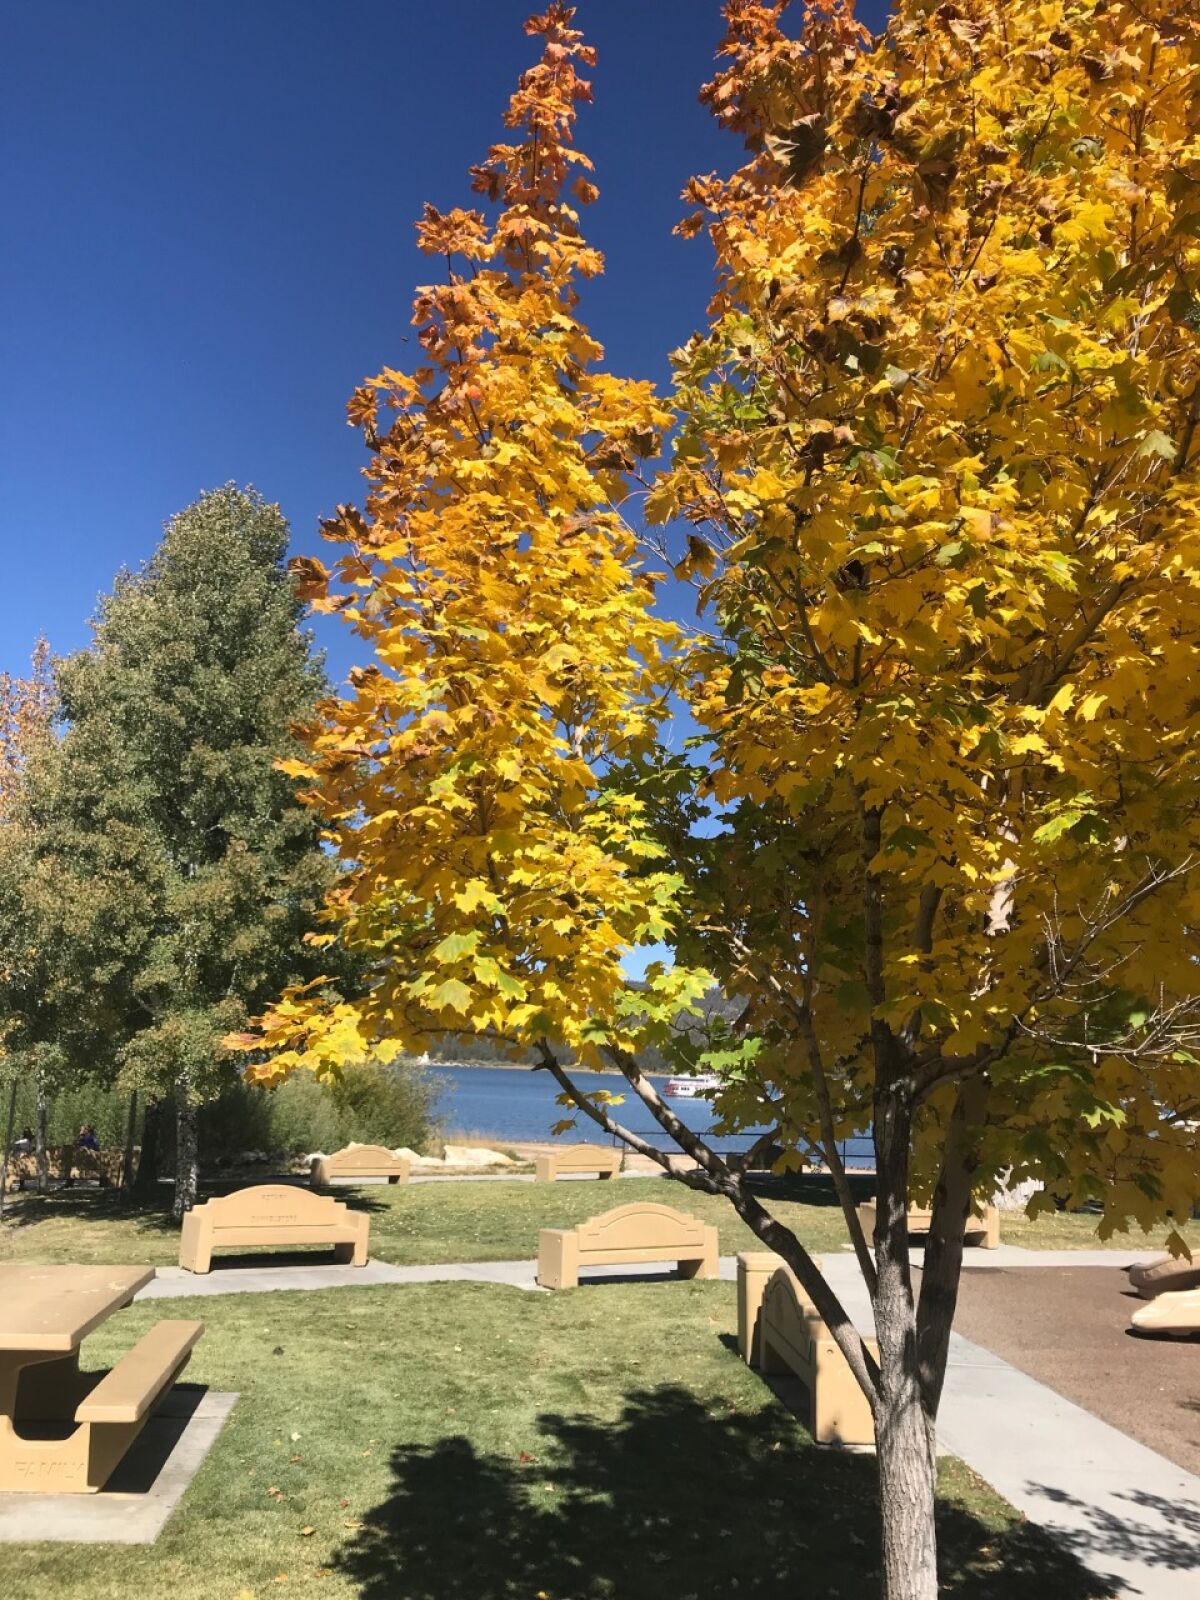 Yellows and gold, shown in a recent photo, are the most common colors at Big Bear Lake.